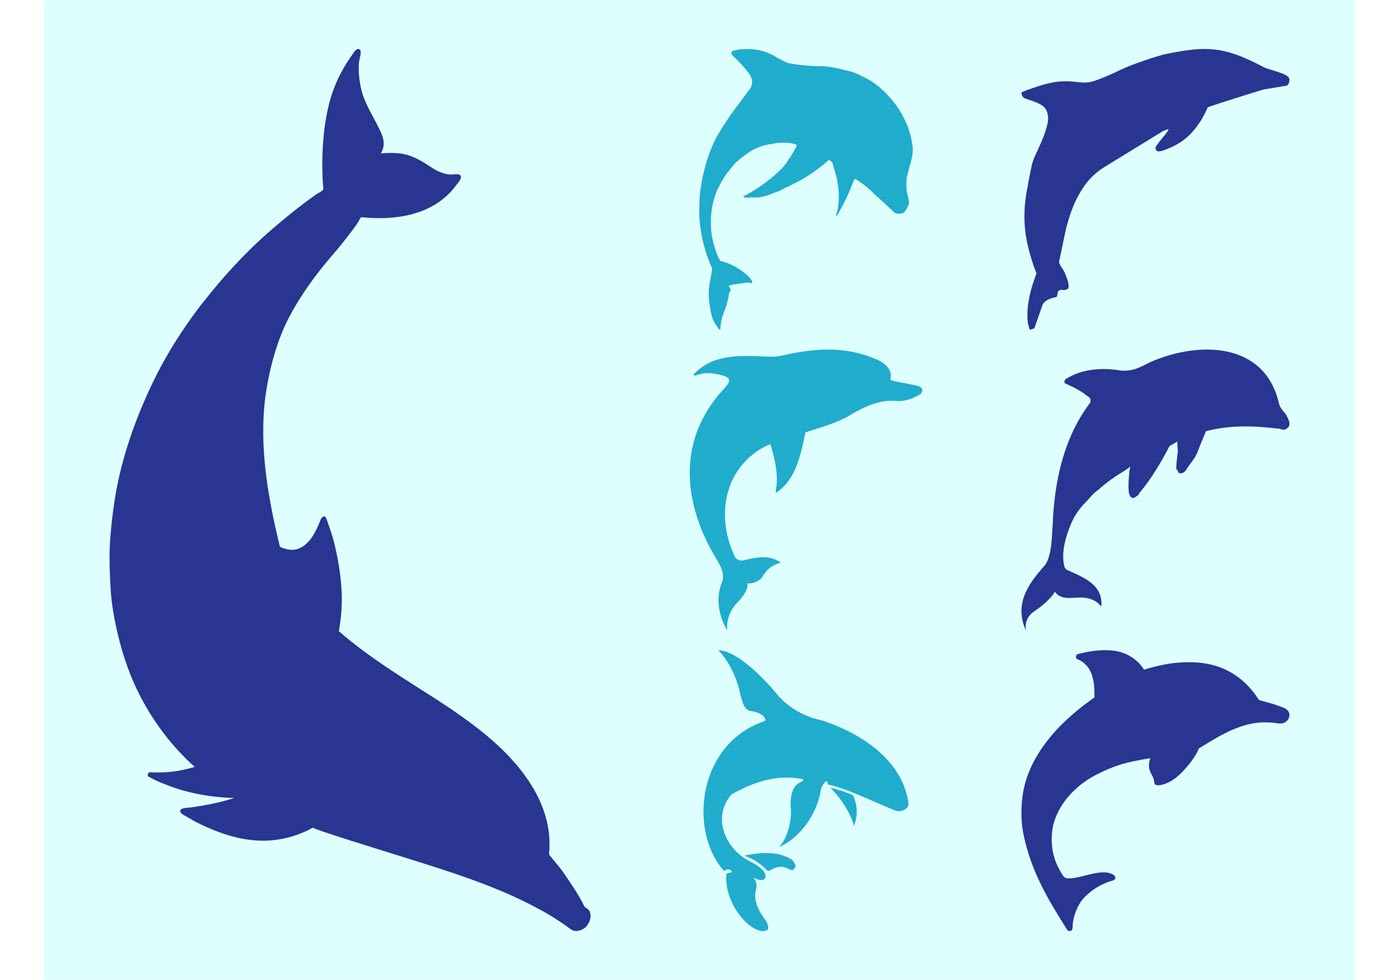 Dolphin Free Vector Art - (2641 Free Downloads)